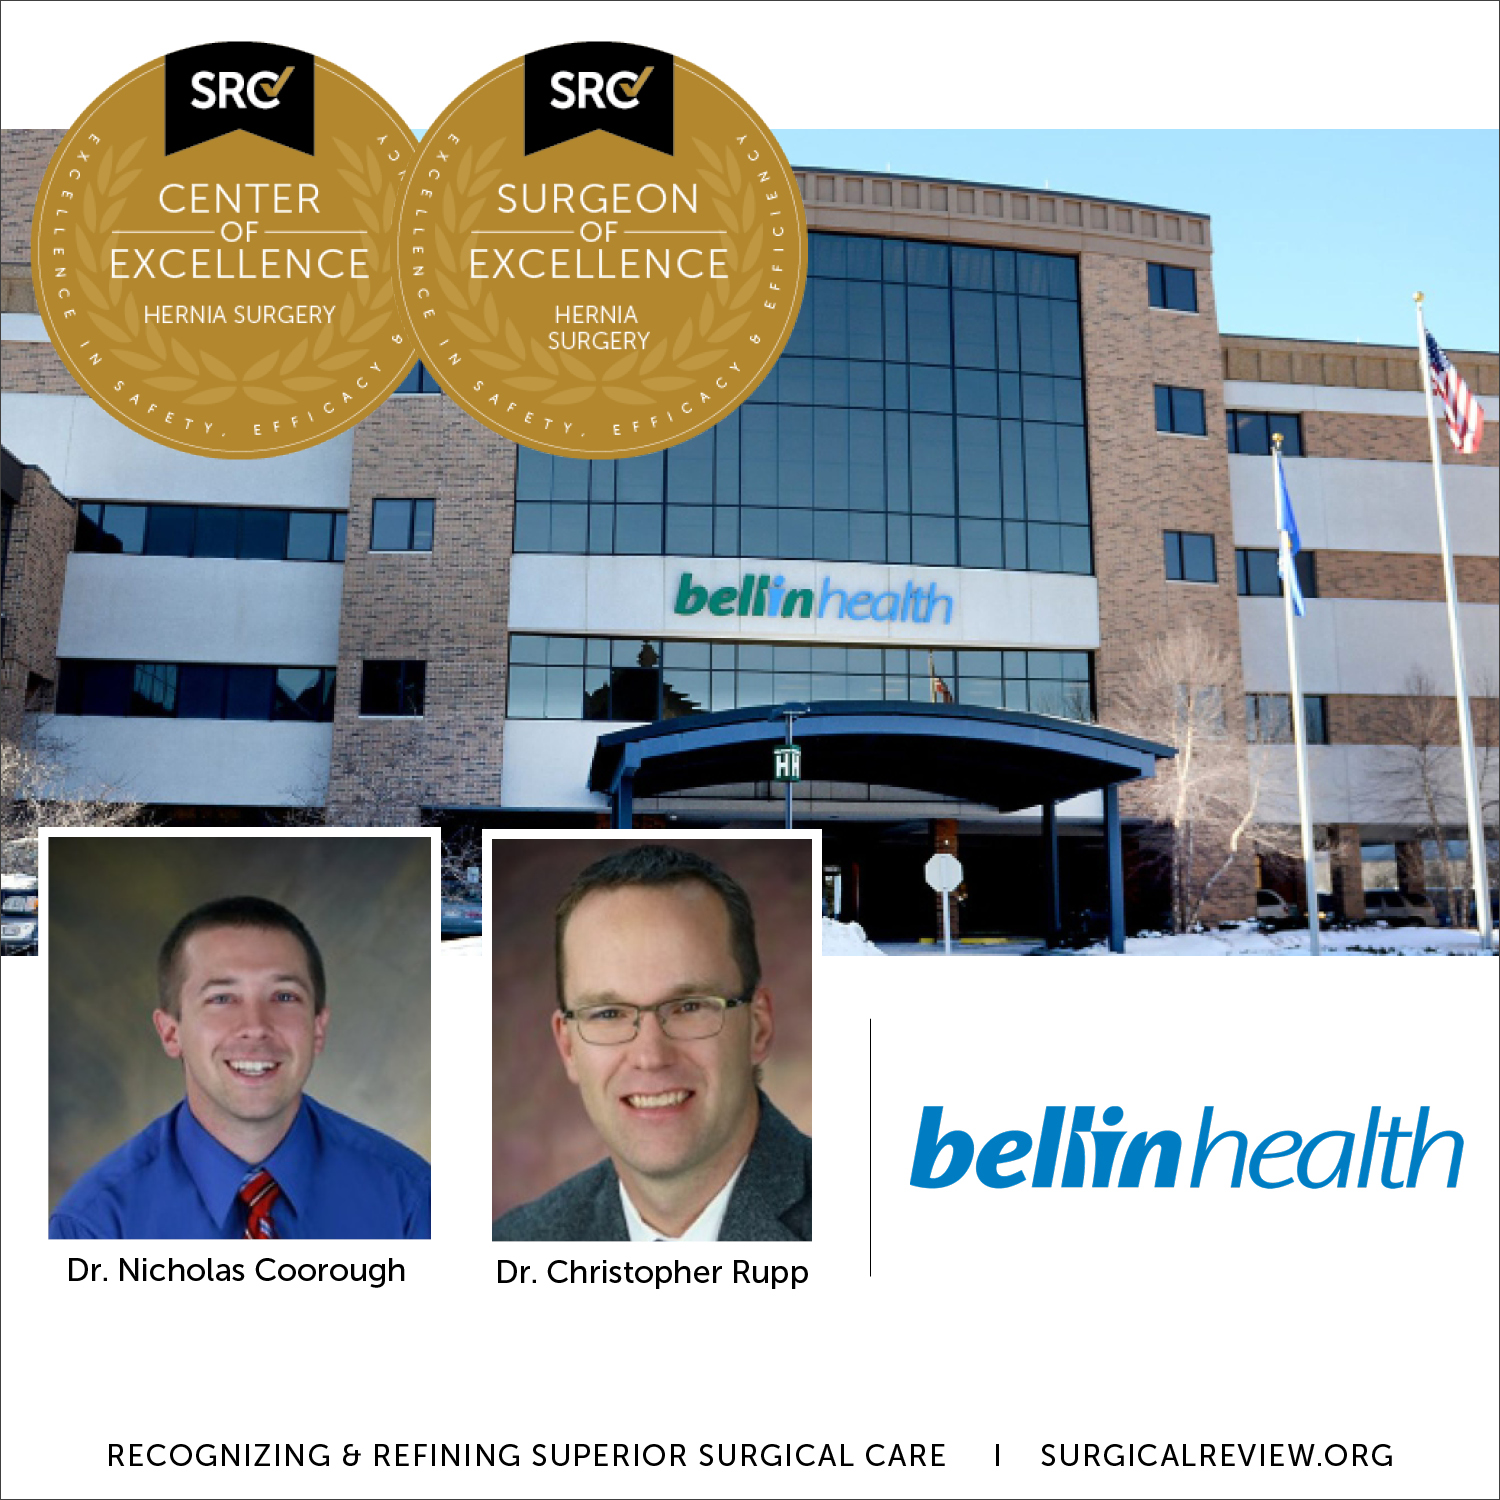 Bellin Health is a Center of Excellence in Hernia Surgery